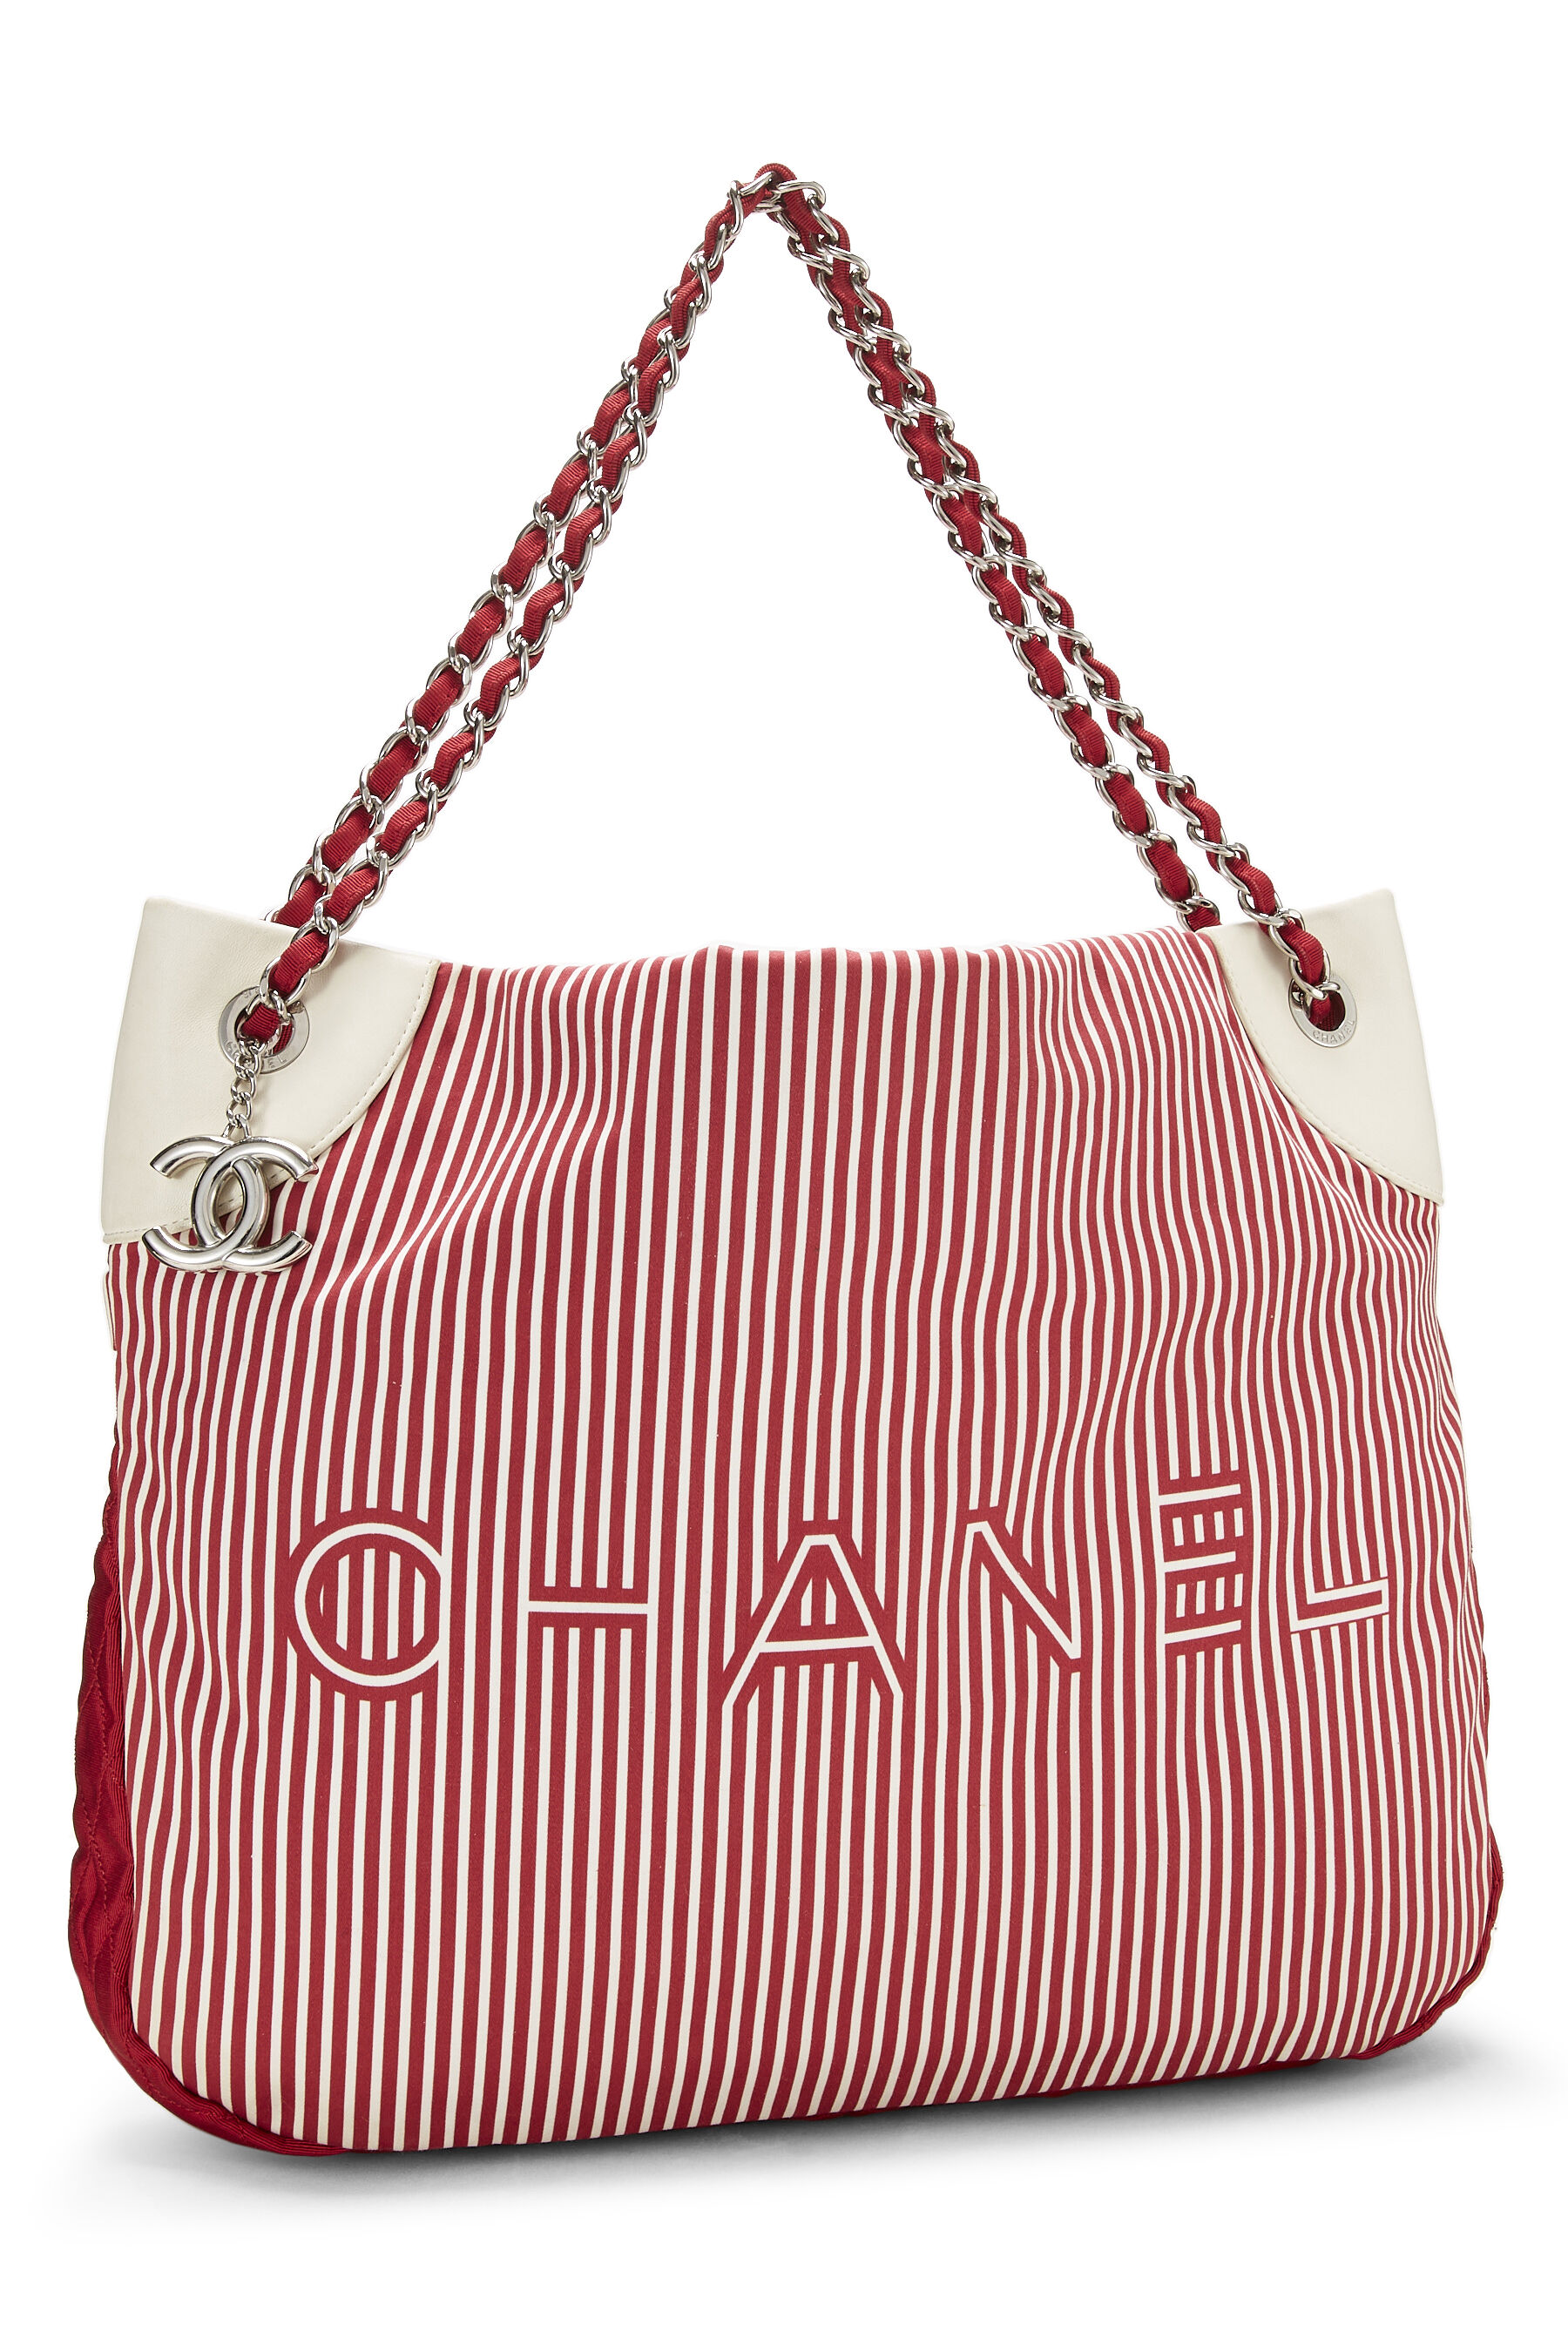 Chanel - Red & White Striped Fabric Tote Large